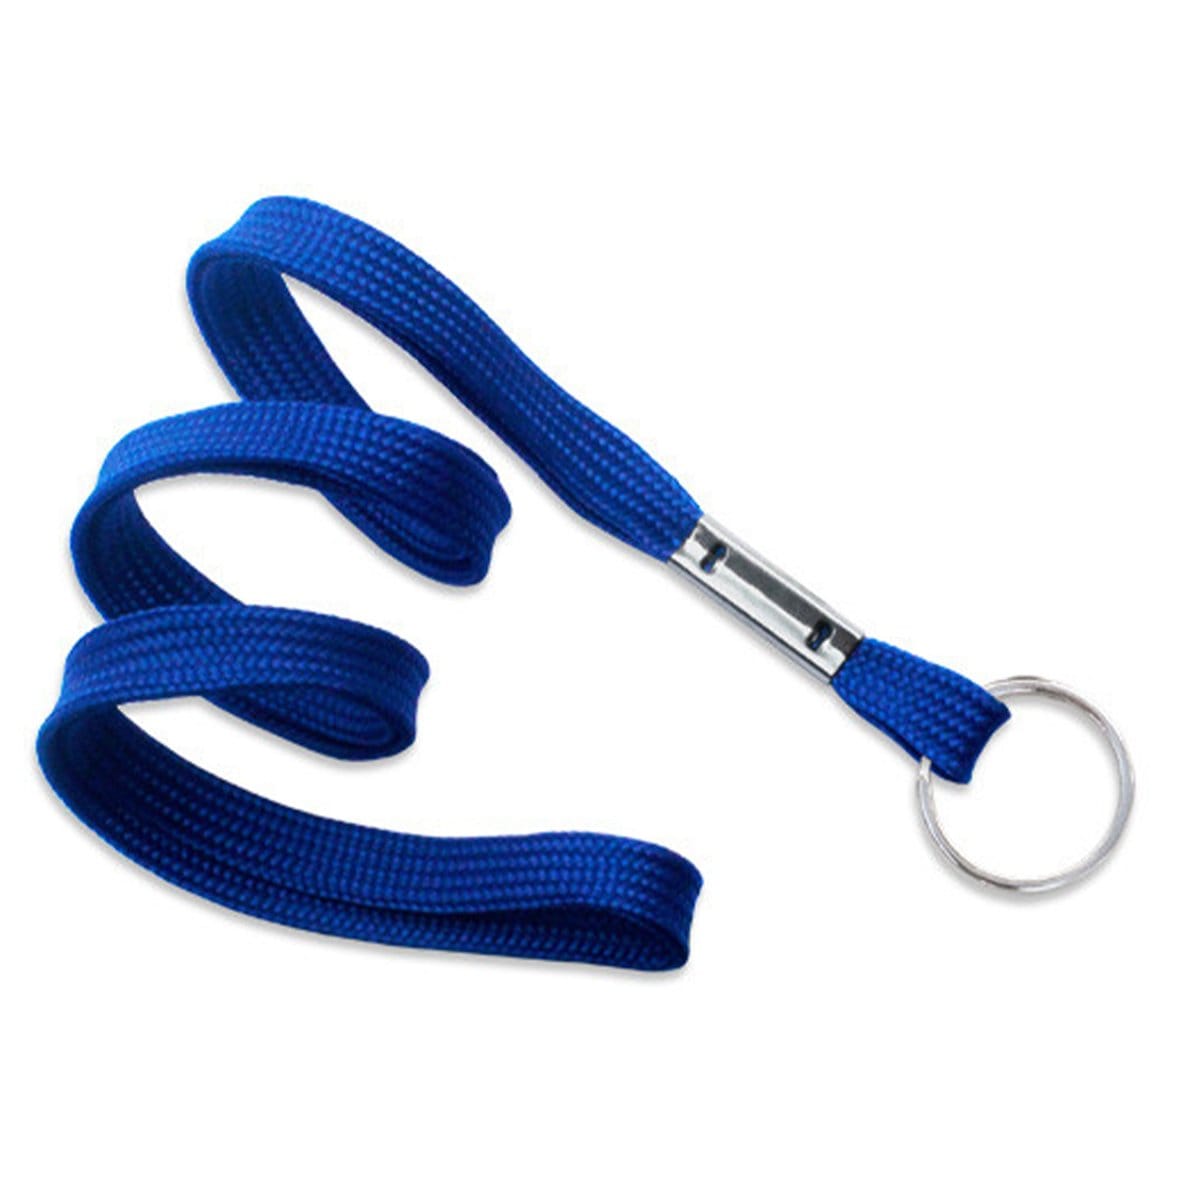 Royal Blue Flat Braid Woven Lanyard With Nickel-Plated Steel Split Ring 2135-365X 2135-3652